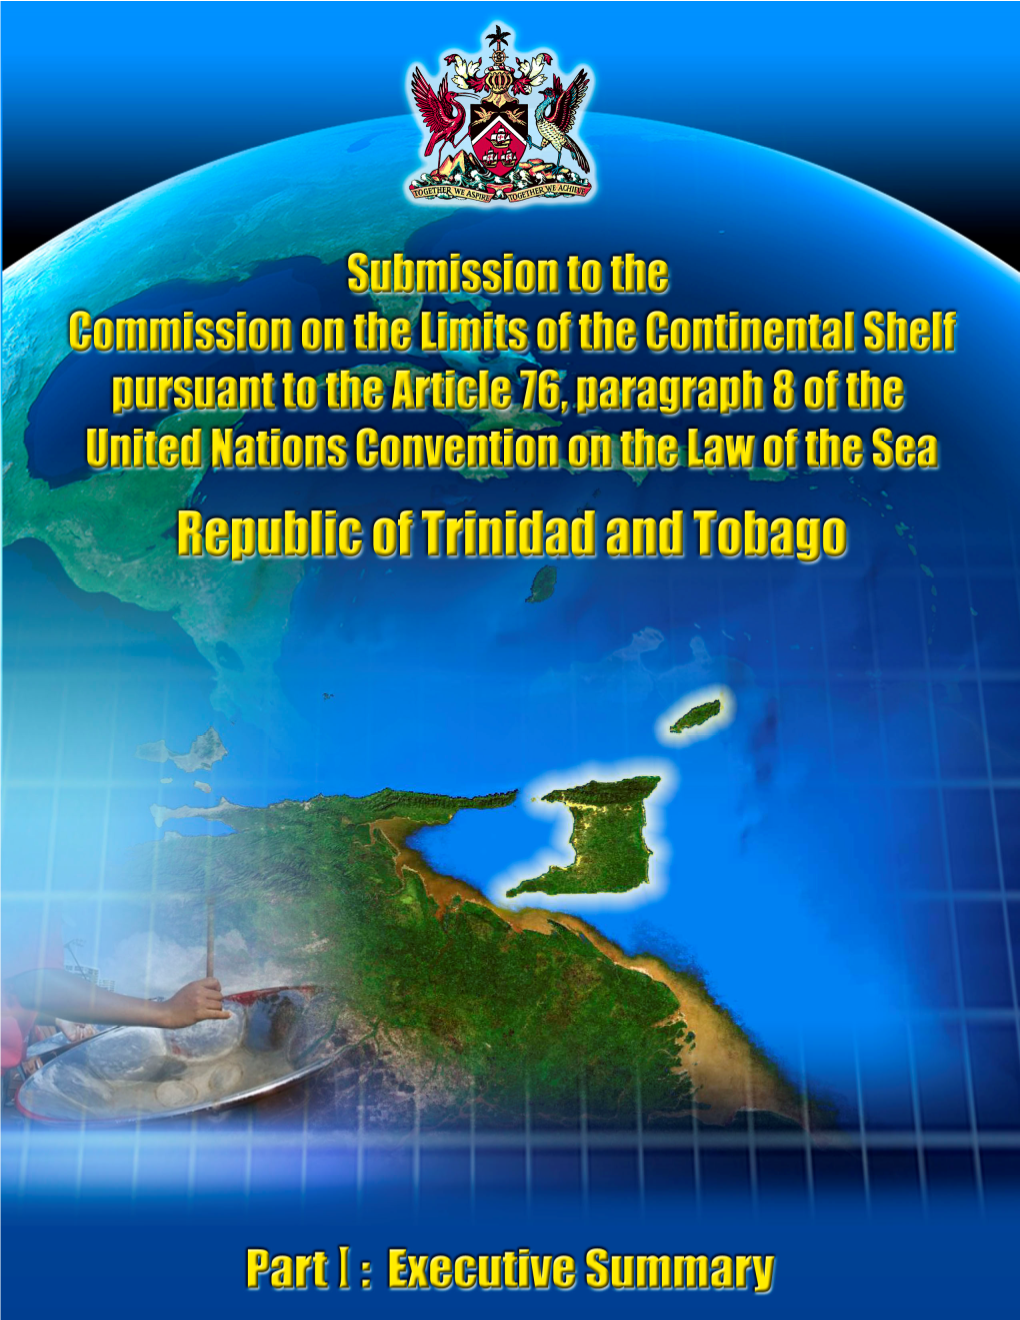 Submission to the Commission on the Limits of the Continental Shelf